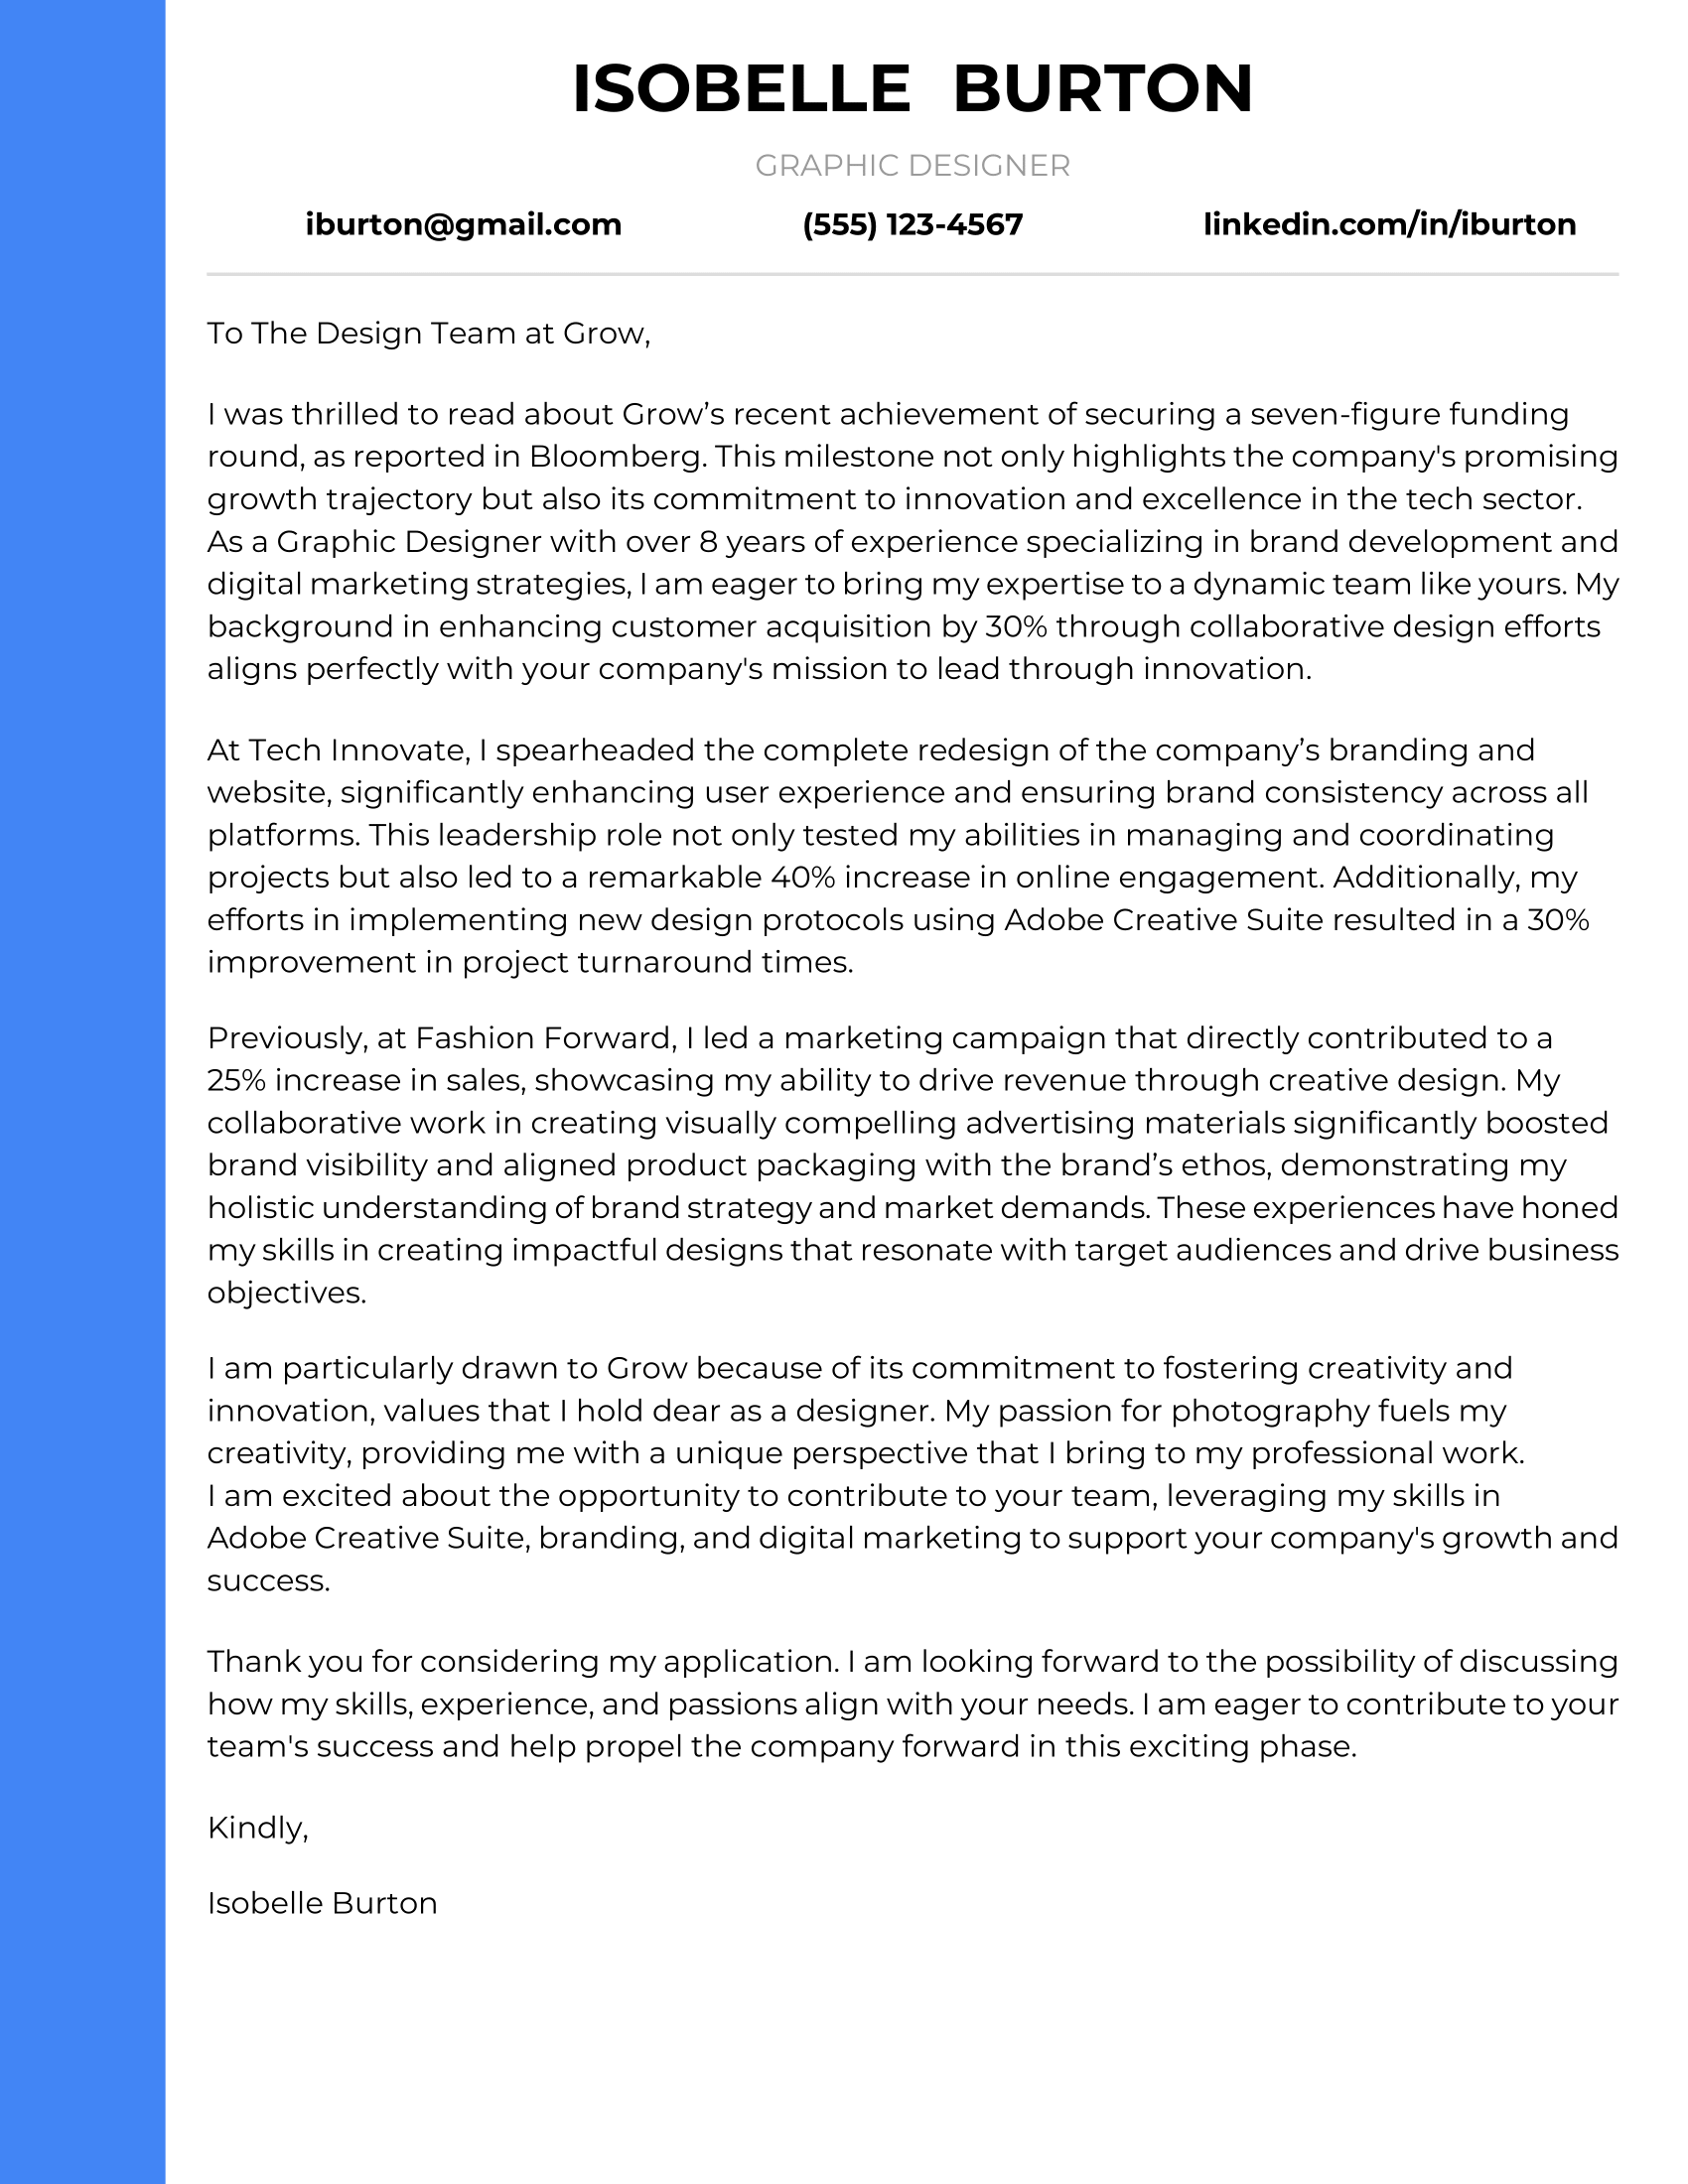 Graphic Designer Cover Letter Example #1 - Traditional-1